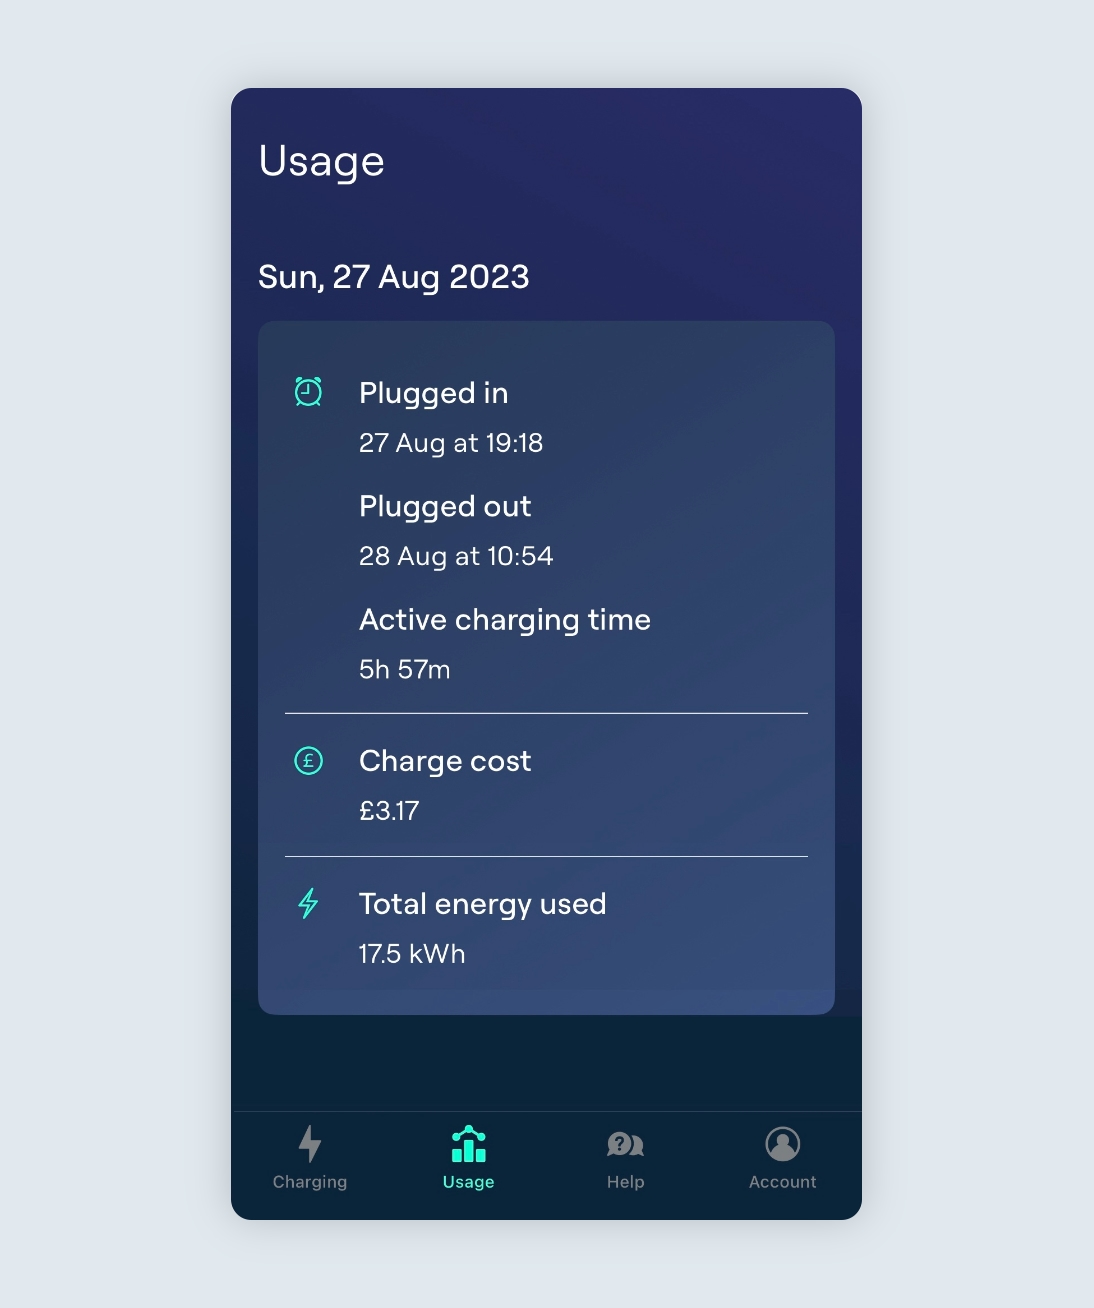 The Usage page of the Ohme app